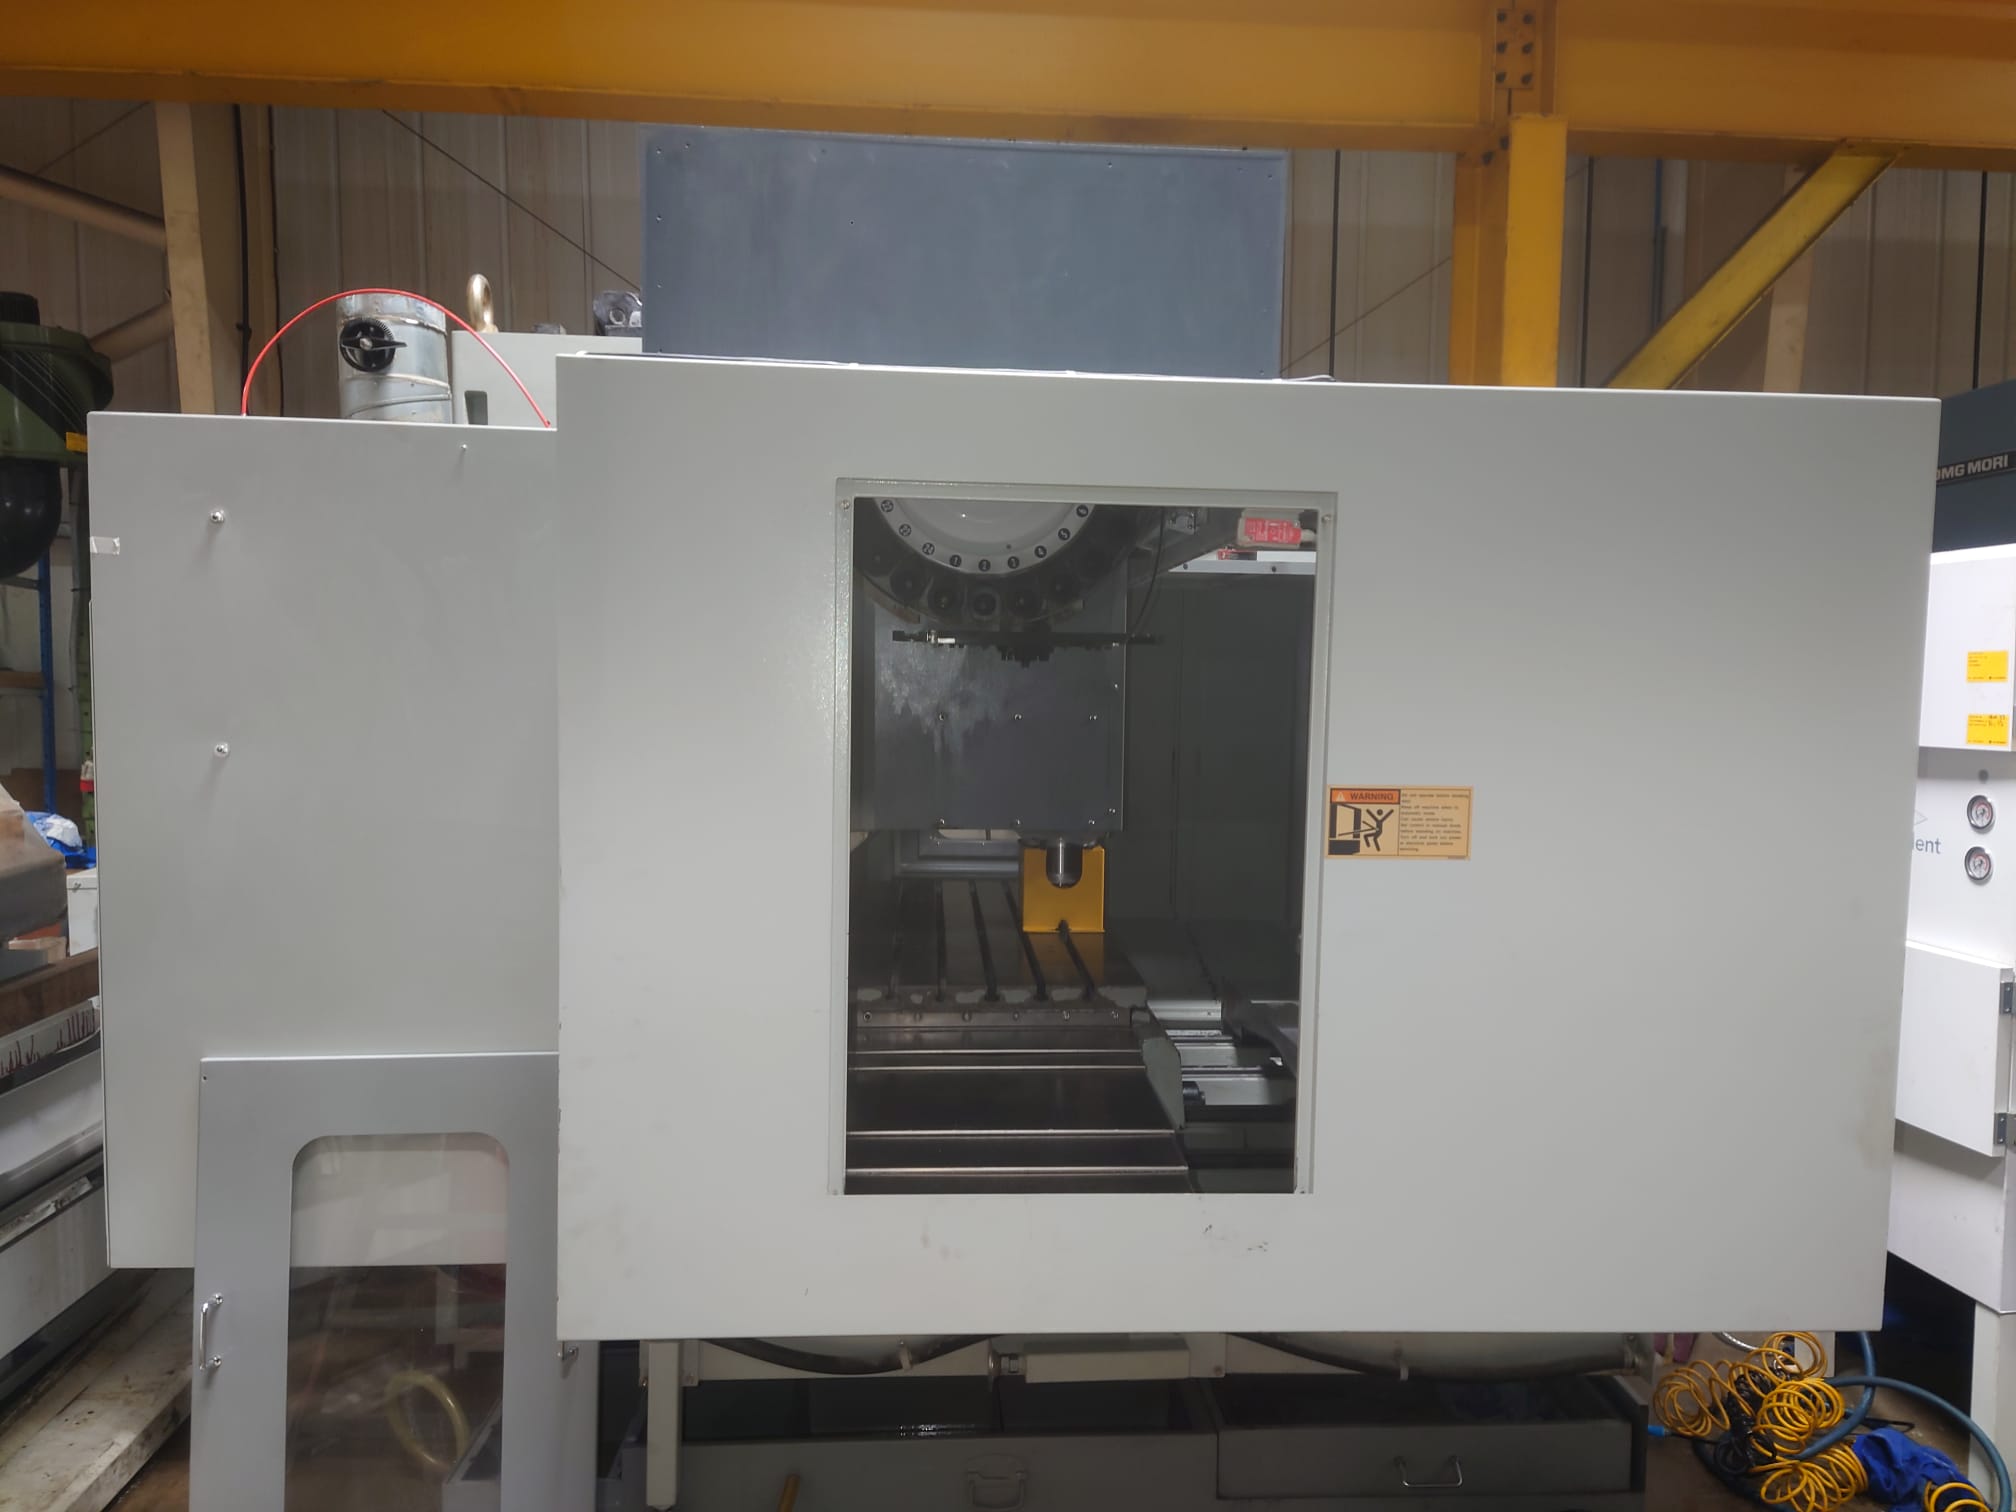 Vertical Machining Centres/Used Dugard 1300 CNC Vertical Machining Centre (4448)